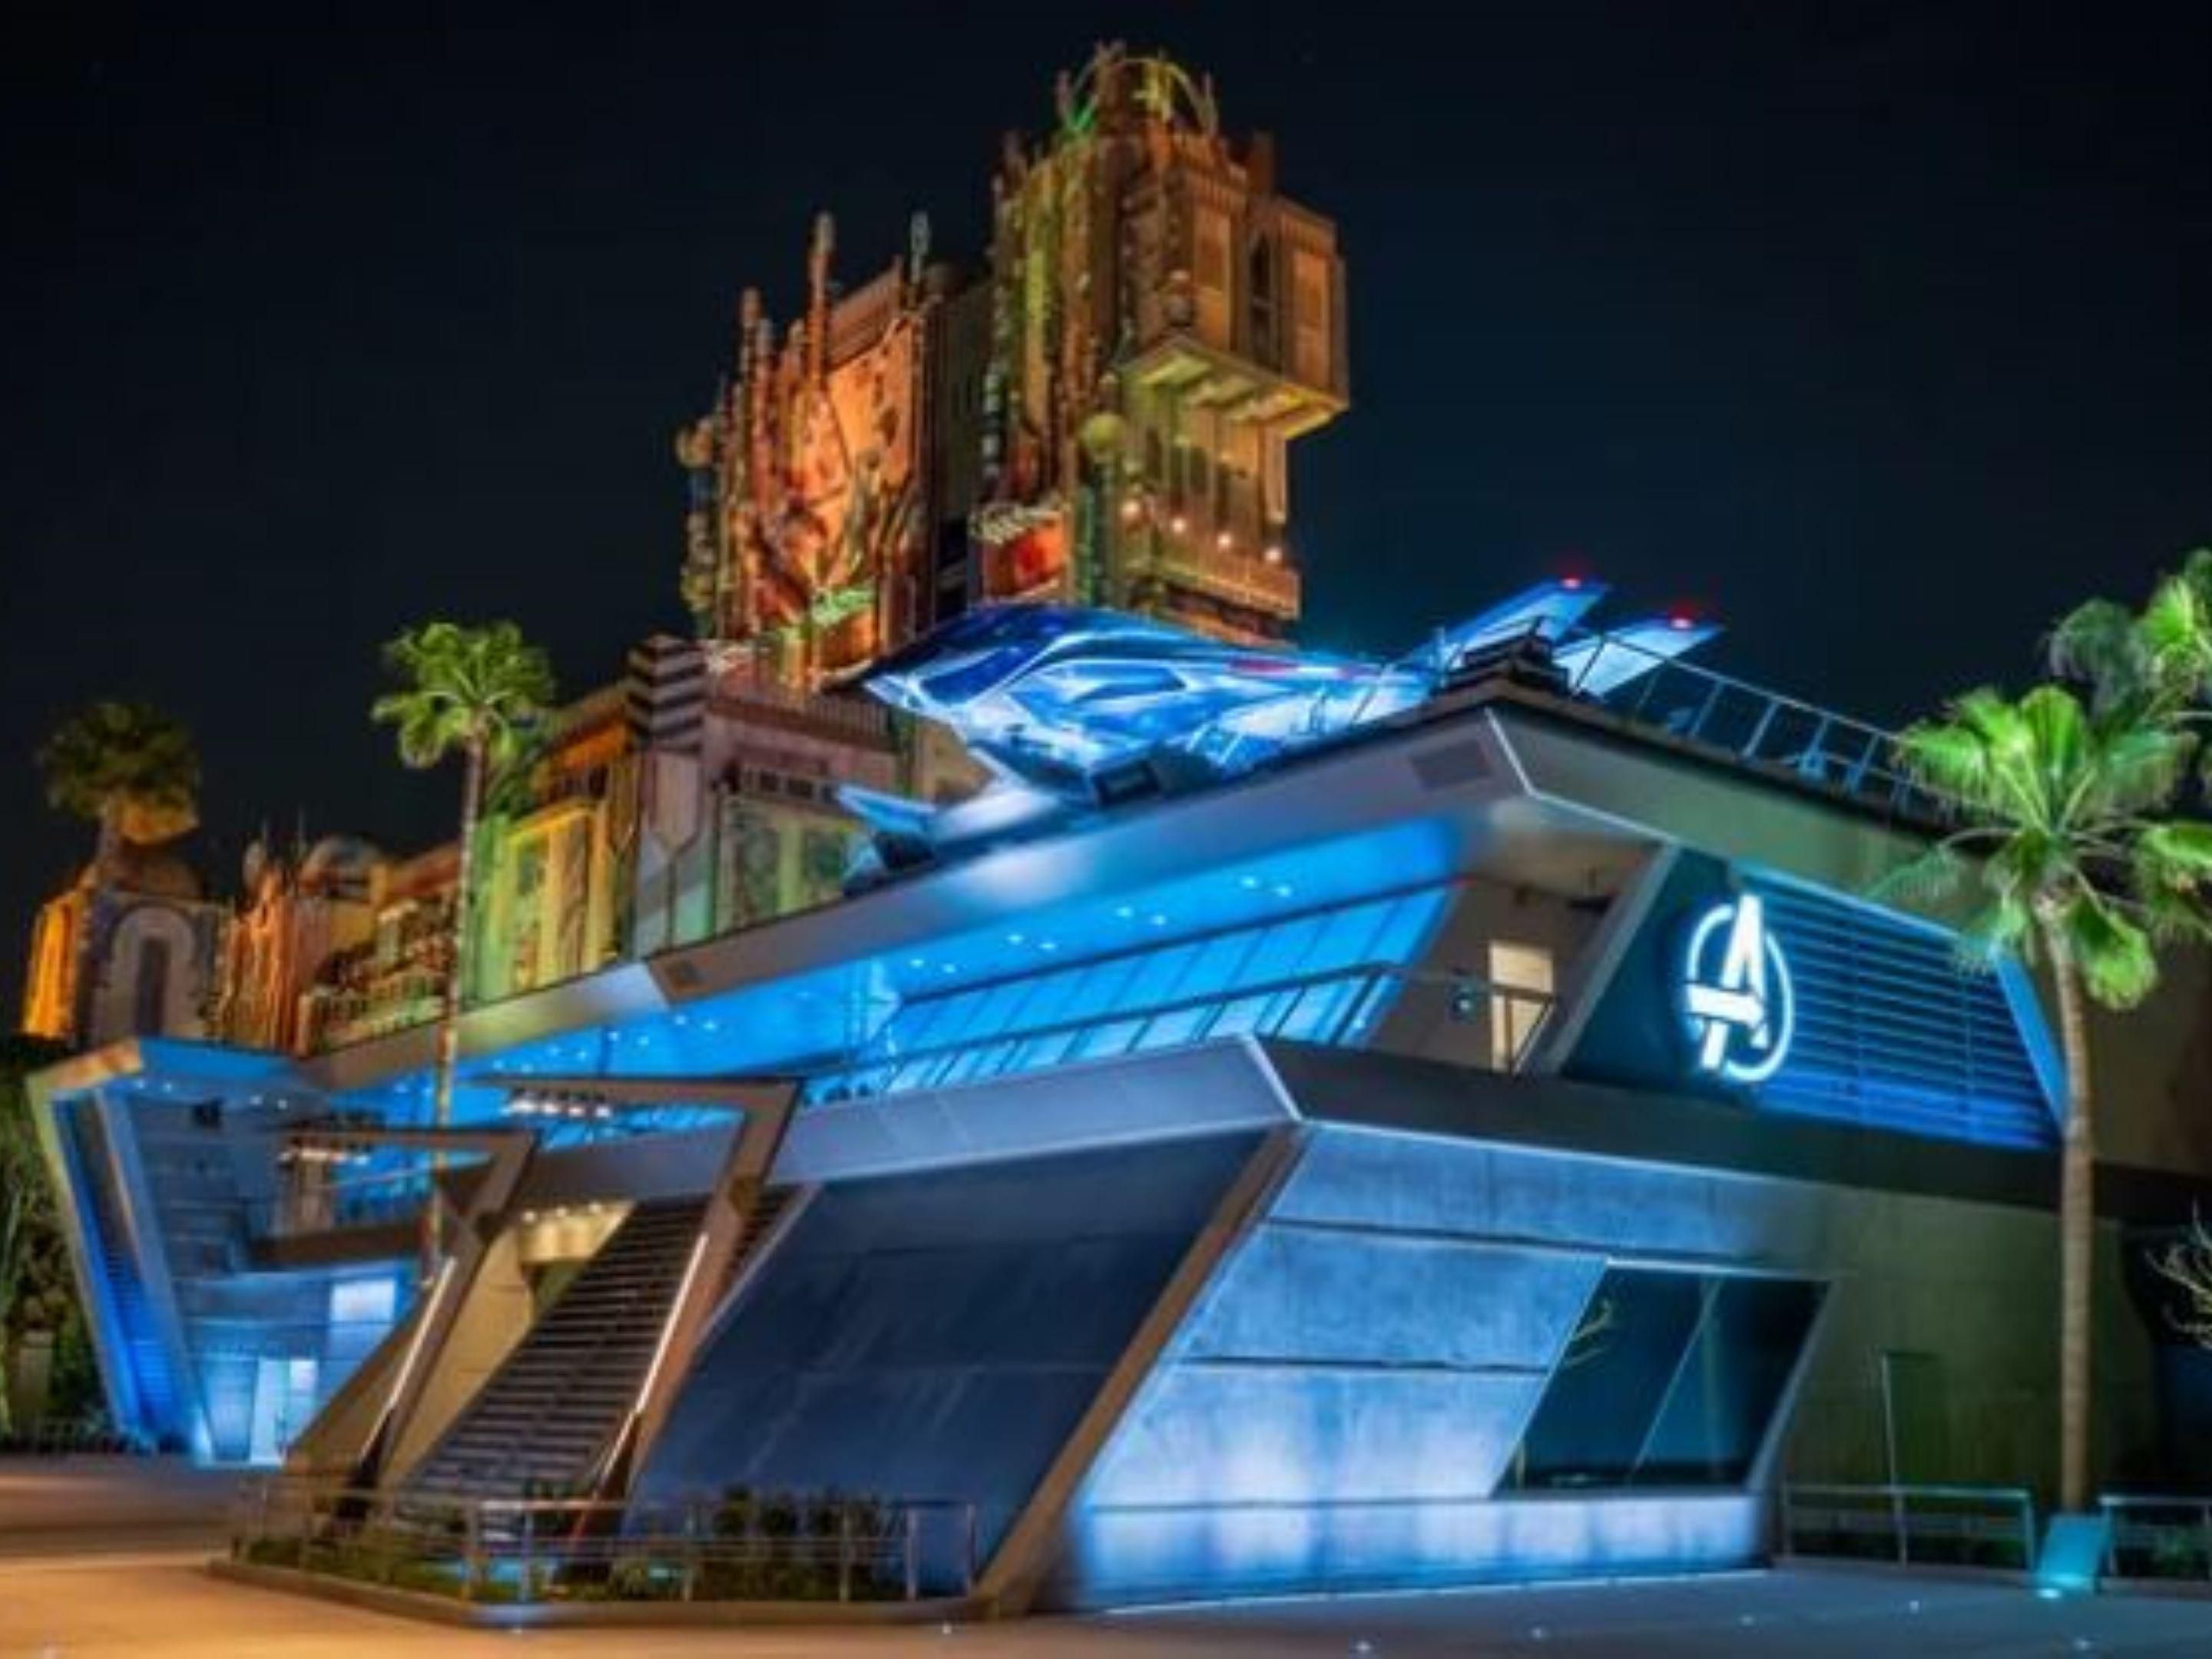 Marvel Avengers fans can now experience the new Avengers Campus and new Web Slingers Spiderman Adventure attraction at Disney's California Adventure Park.  The Disney Resort Anaheim is just a short drive away from the Holiday Inn OC Airport.  Advanced reservations must be made with the theme parks for ticket entry.